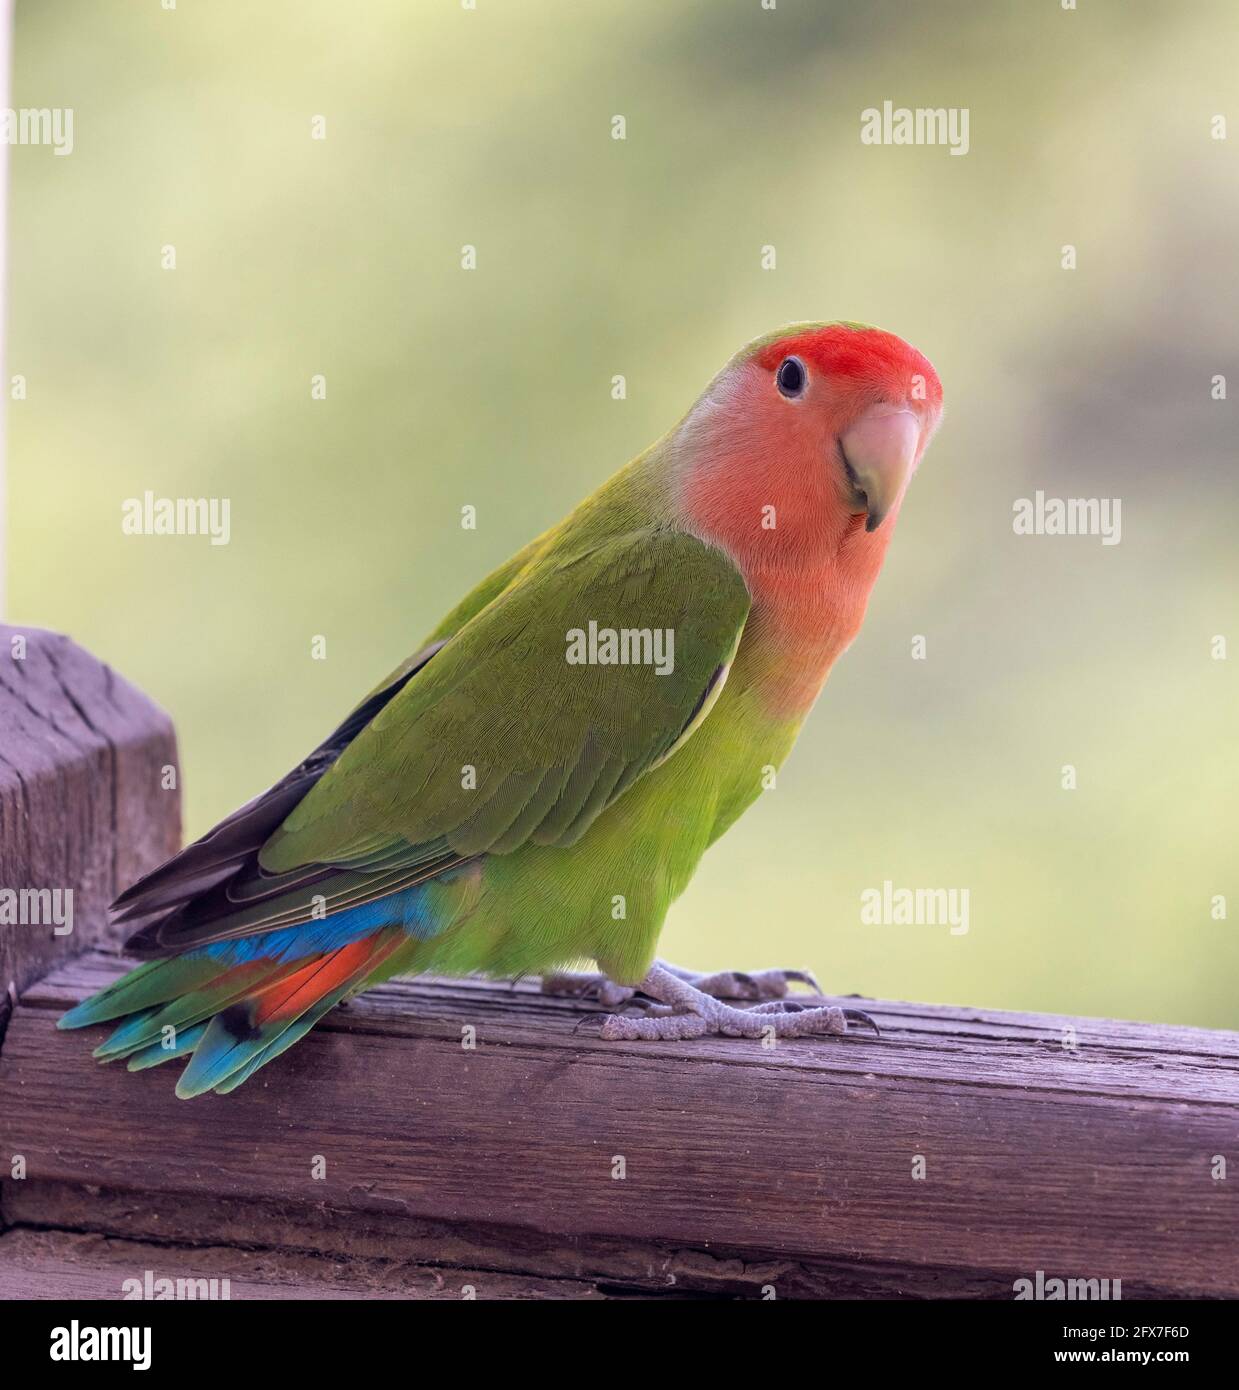 feral rosy-faced lovebird (Agapornis roseicollis), also known as the rosy-collared or peach-faced lovebird, Cairo, Egypt Stock Photo